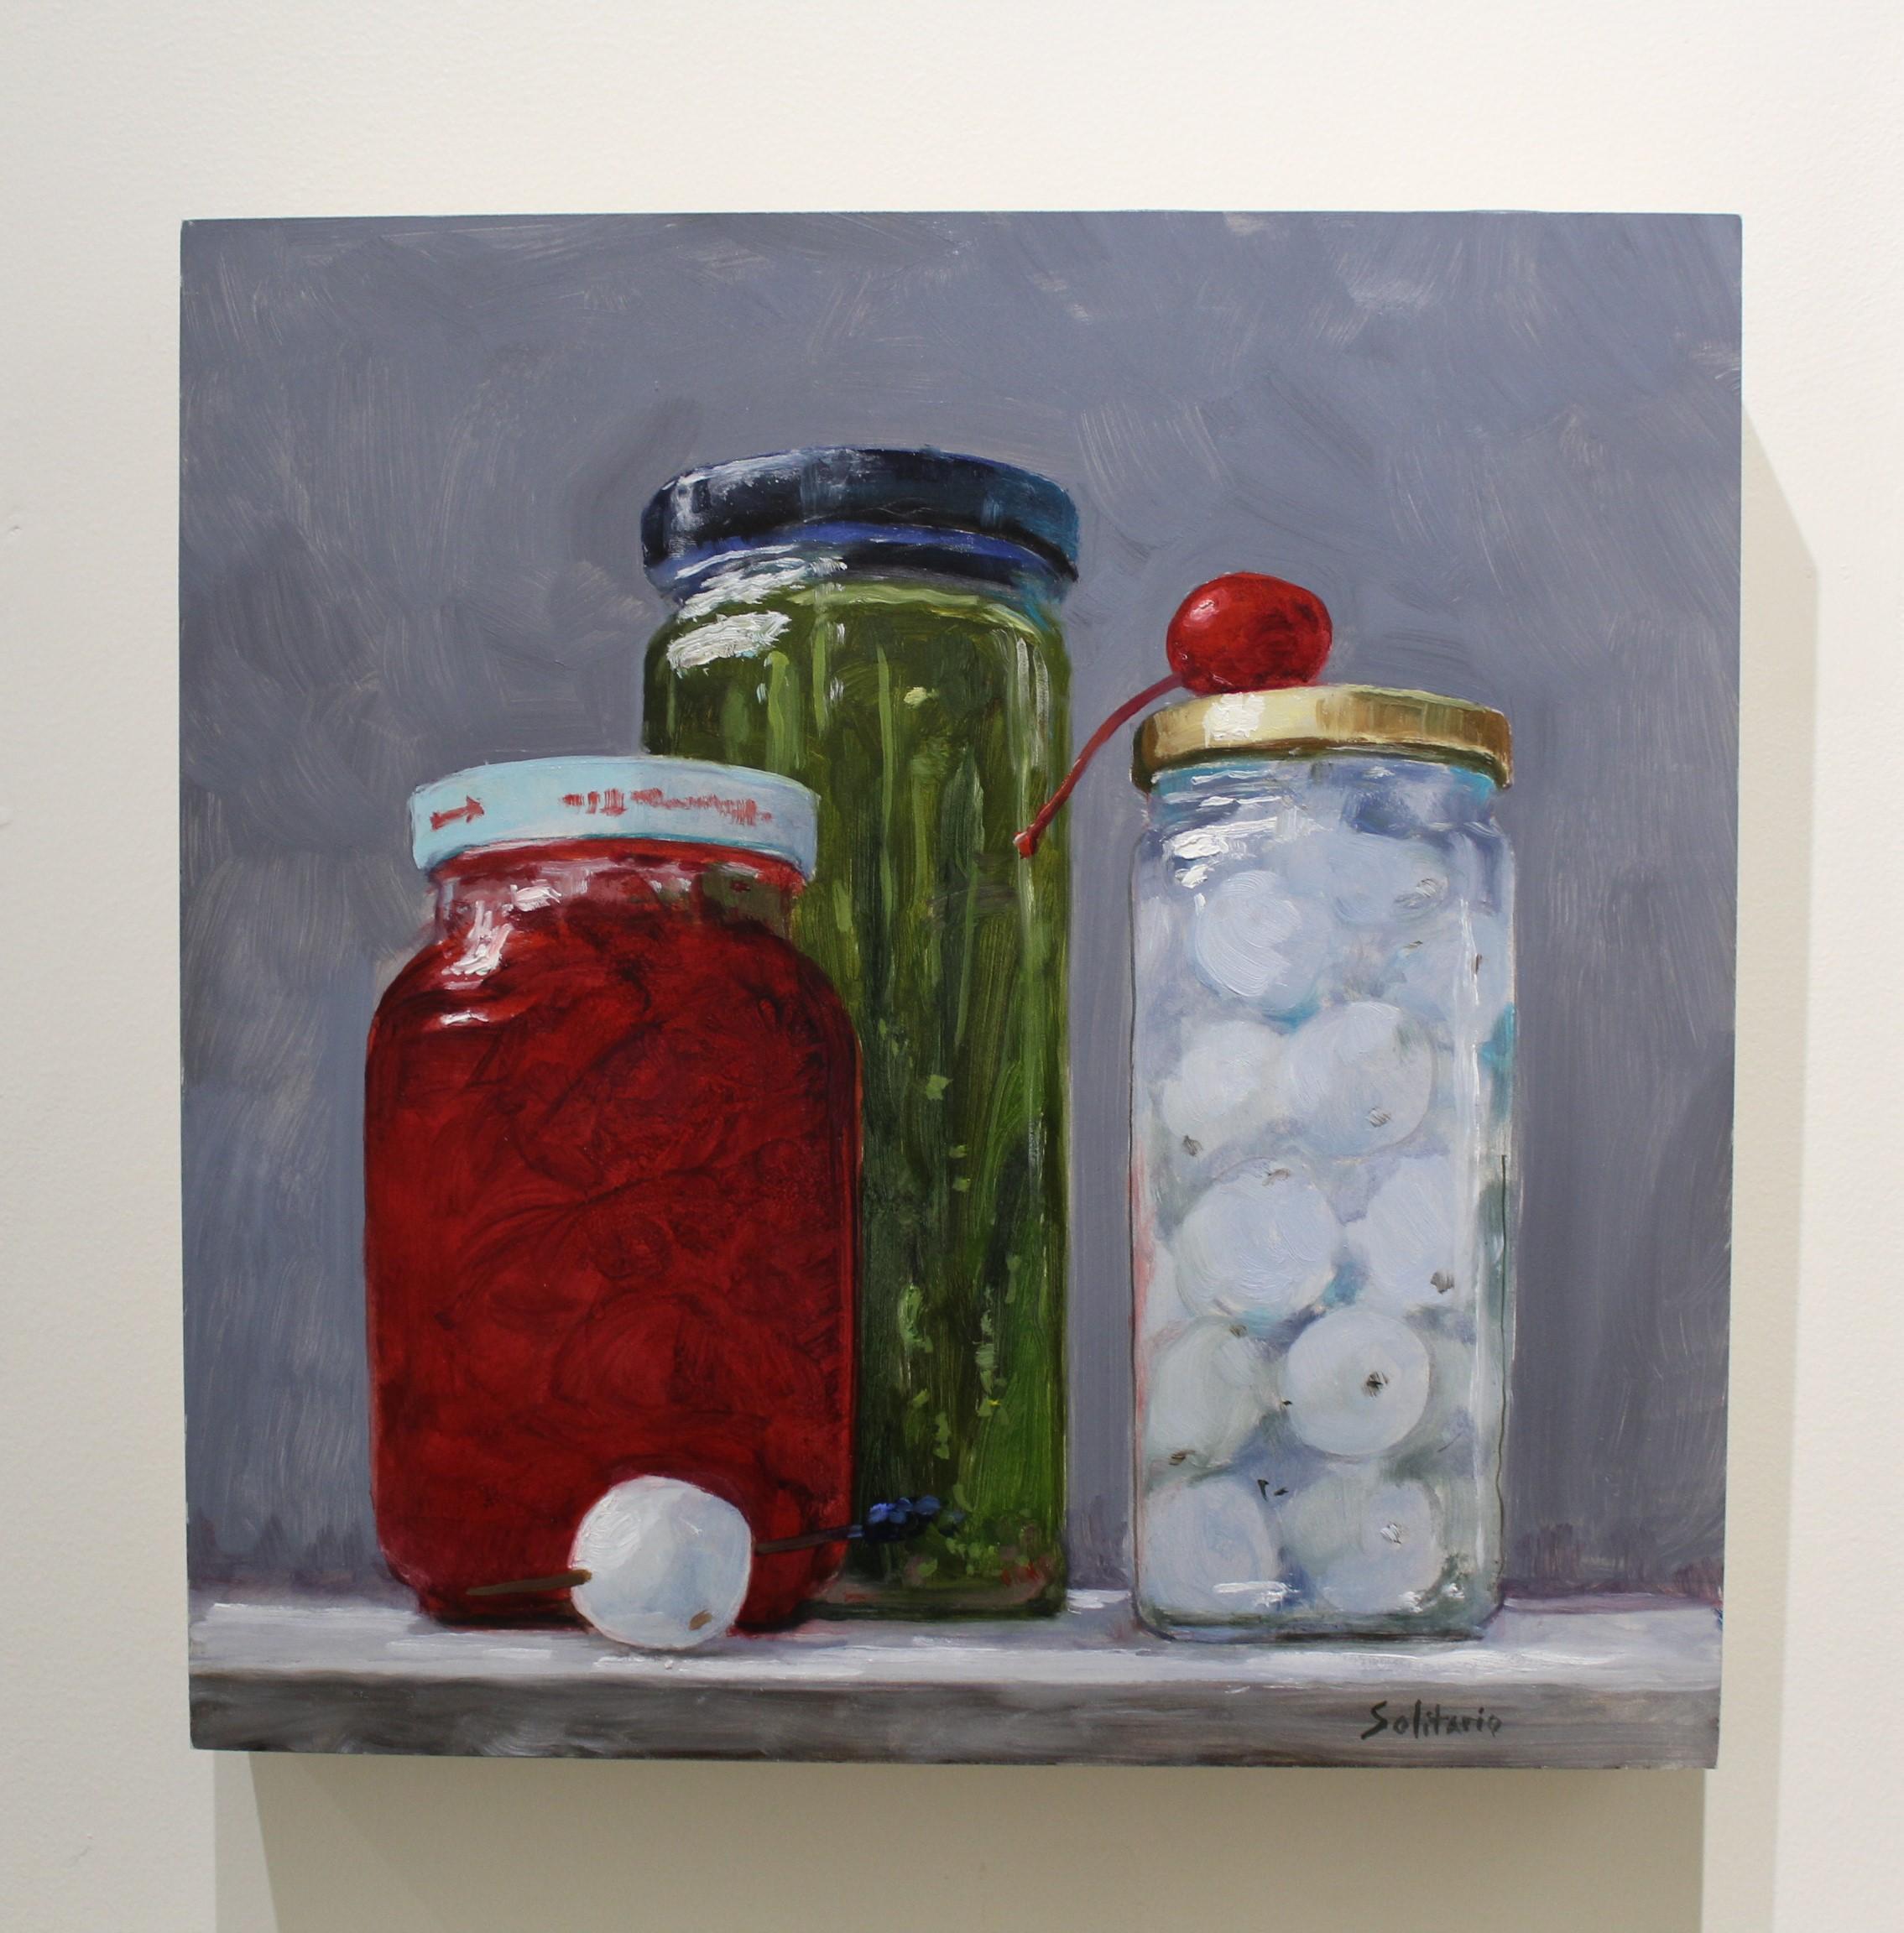 Cocktail Jars - Painting by Billy Solitario